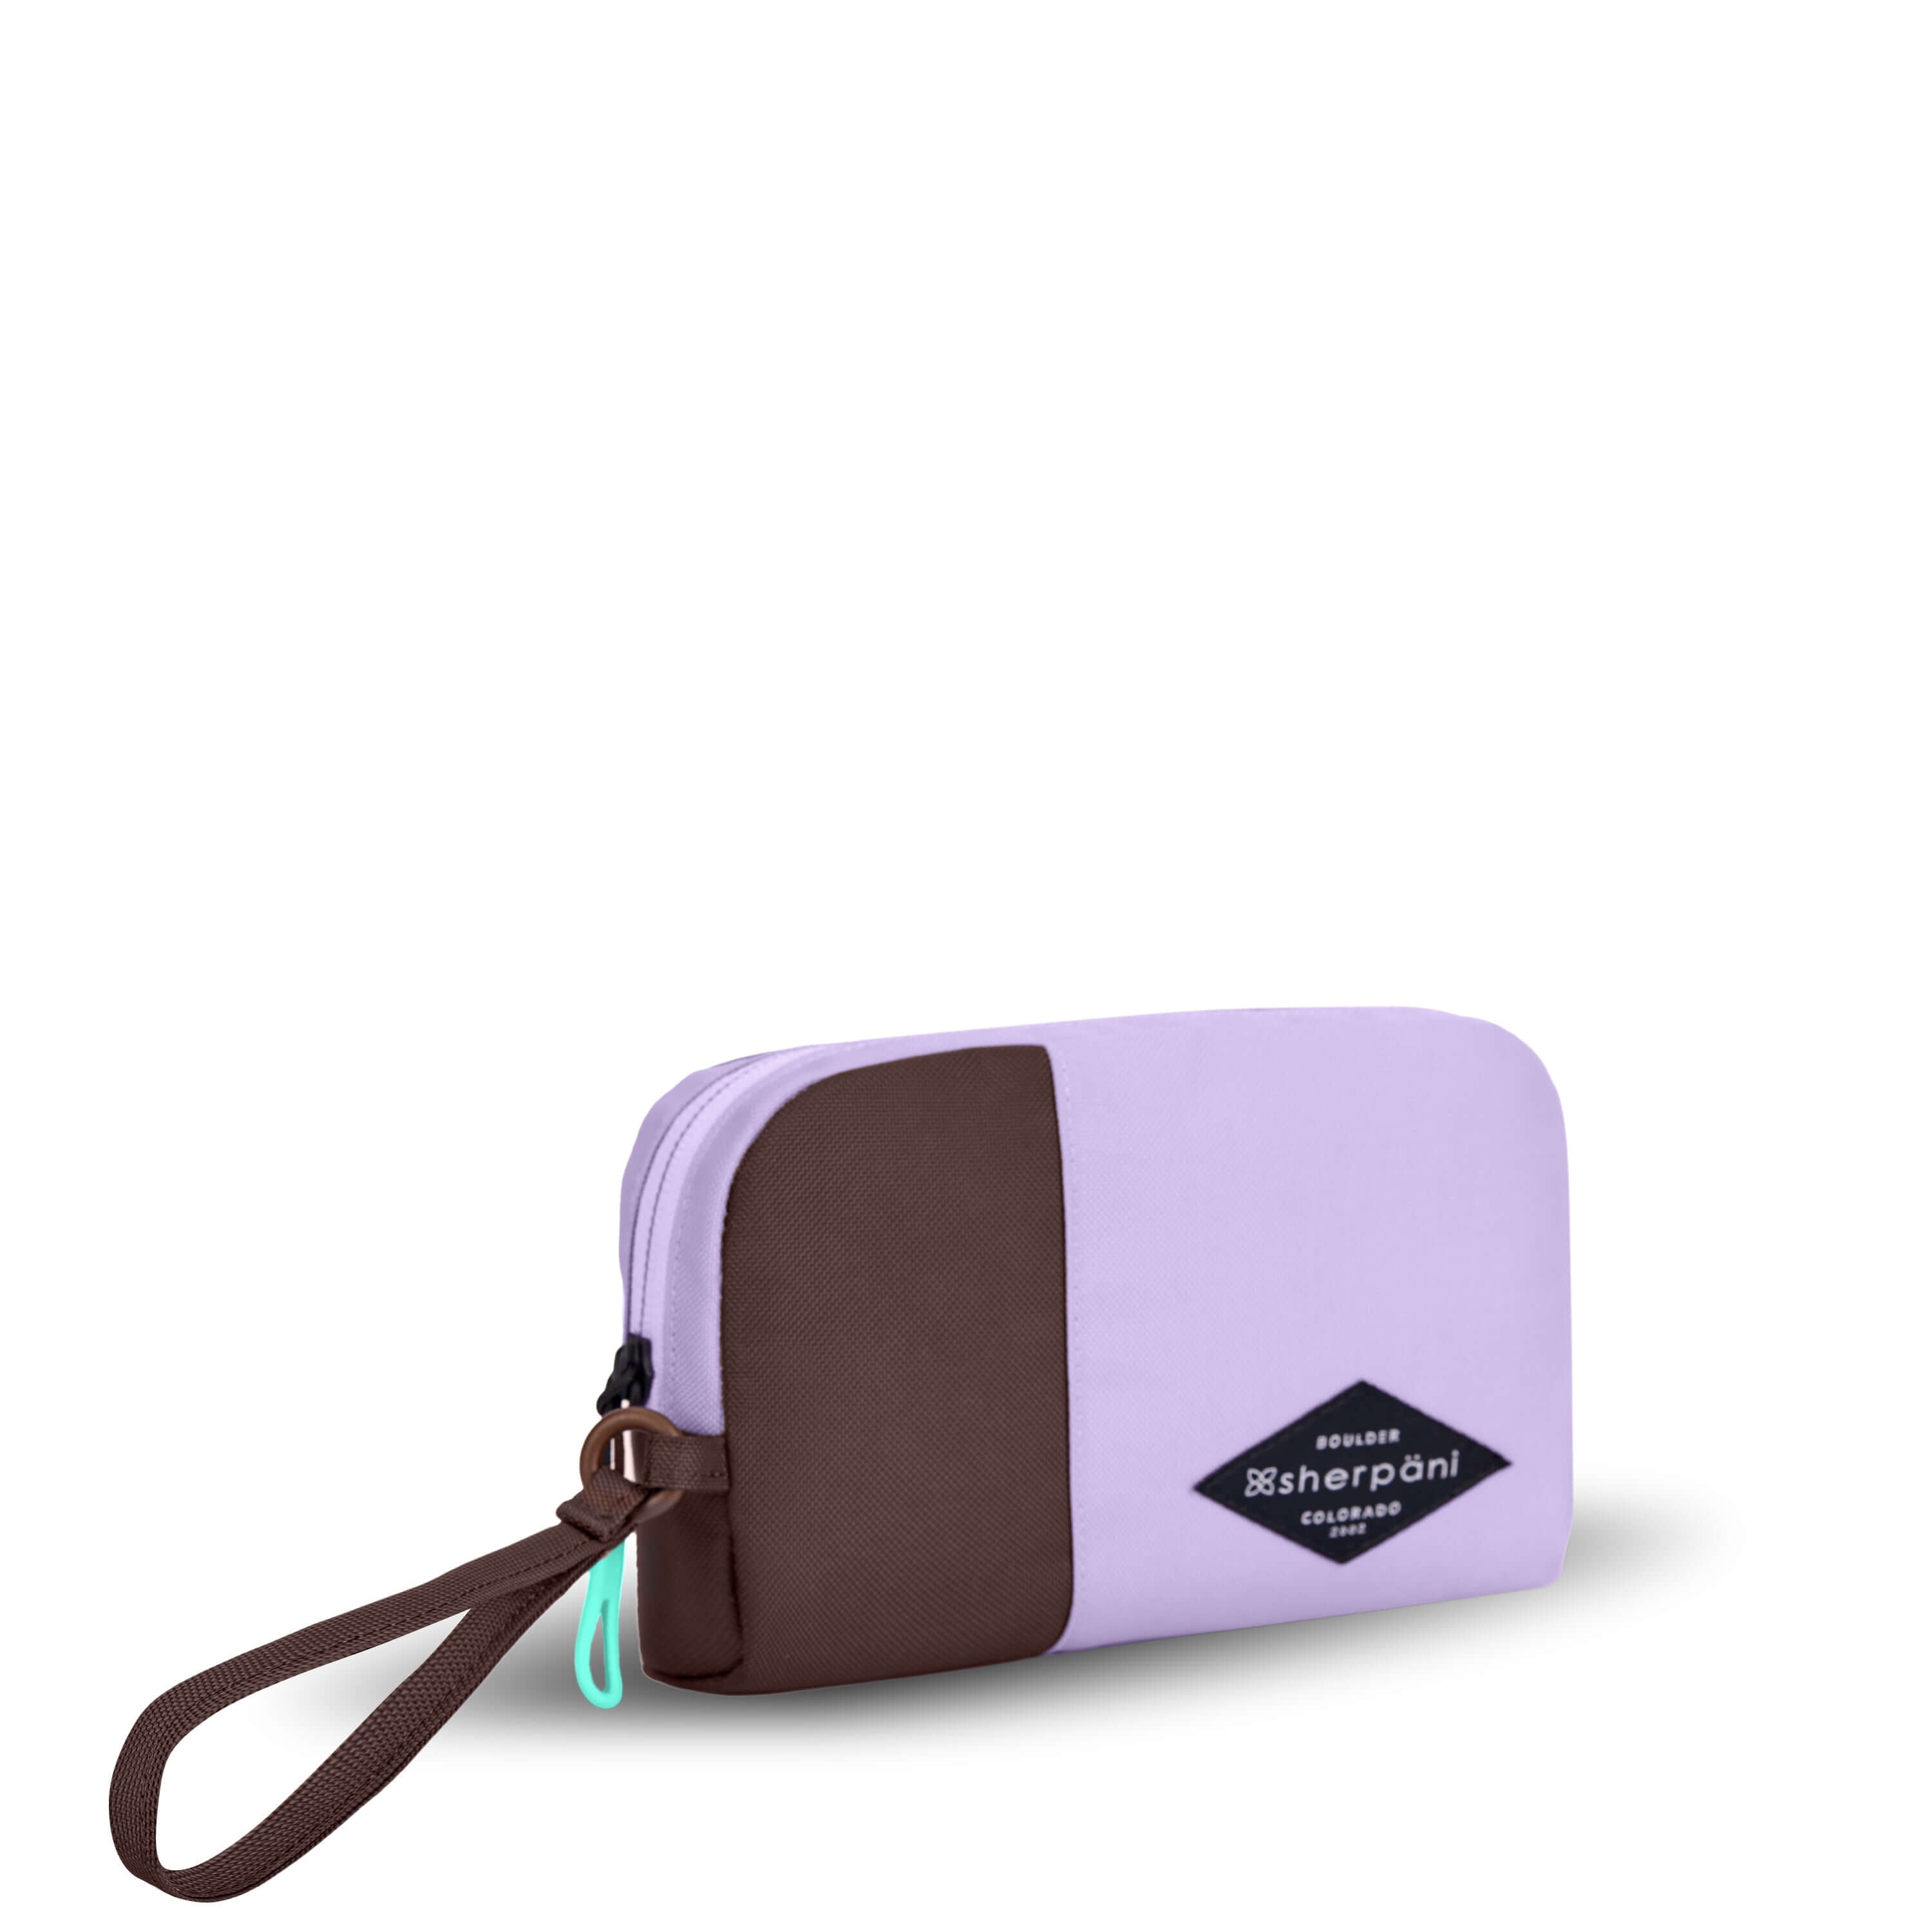 Angled front view of Sherpani travel accessory, the Jolie in Lavender, in medium size. The pouch is two-toned in lavender and brown. It features a brown wristlet strap and an easy-pull zipper accented in aqua. #color_lavender